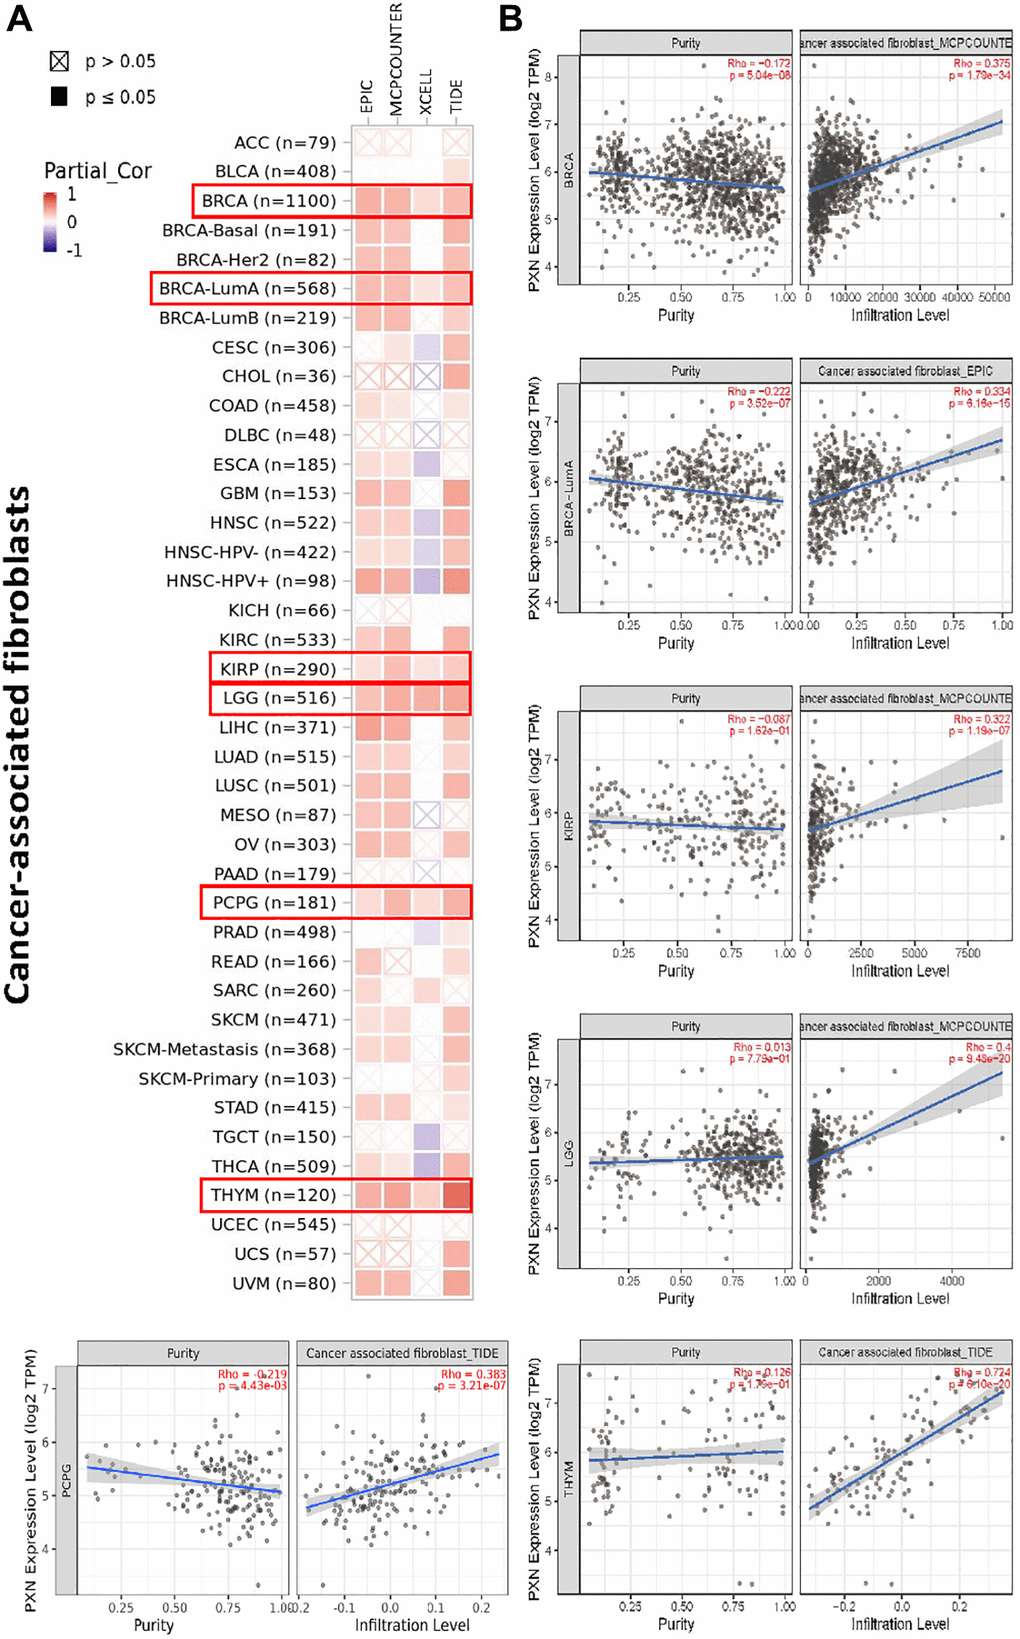 Correlation analysis between PXN gene expression and immune infiltration of cancer-associated fibroblasts. Different algorithms explored the potential correlations of (A) expression of the PXN gene and (B) infiltration of cancer-associated fibroblasts across all types of cancer in TCGA.